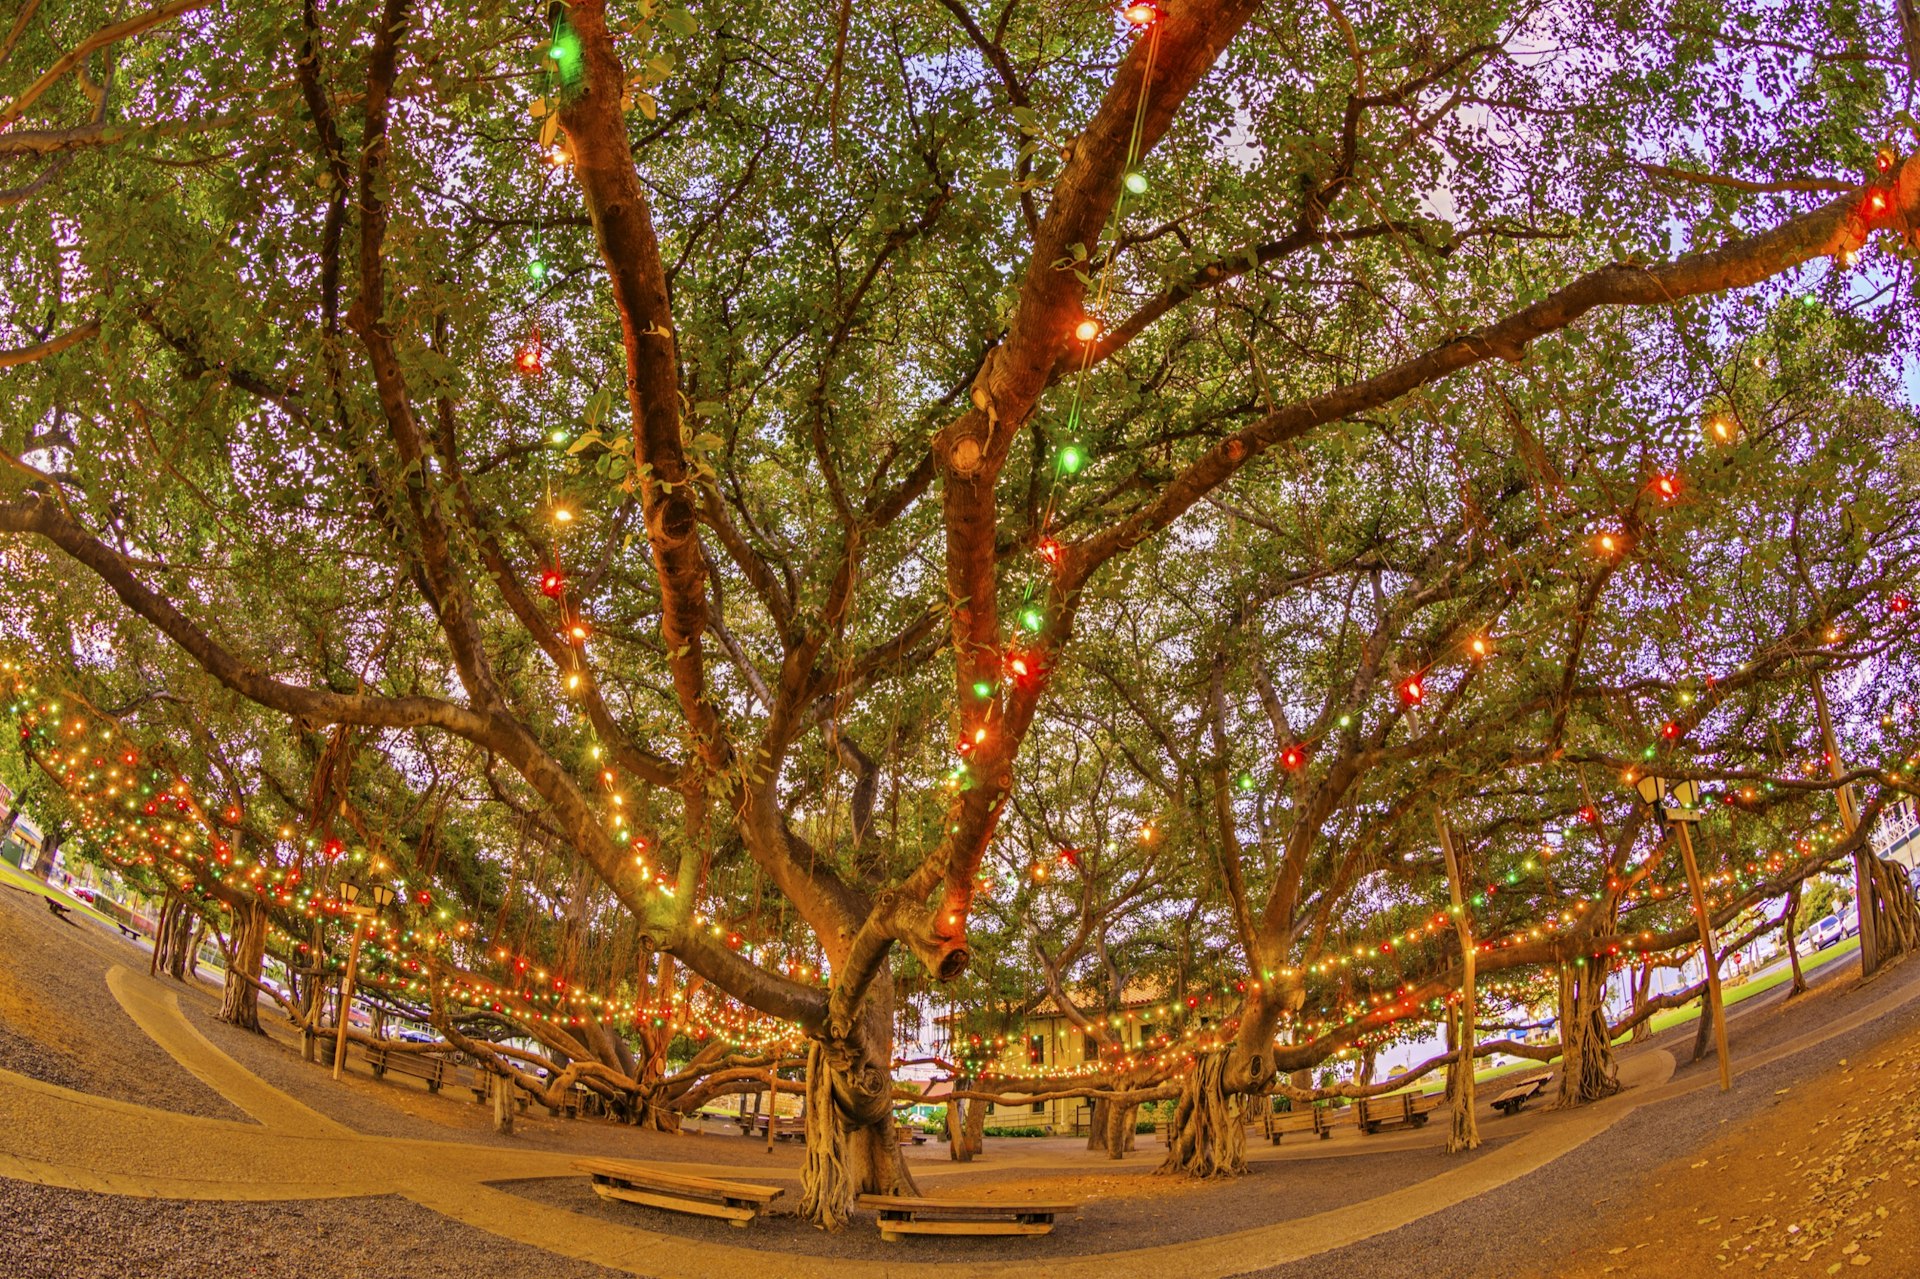 Banyan tree in Lahaina, Maui is decorated with multi-colored Christmas lights